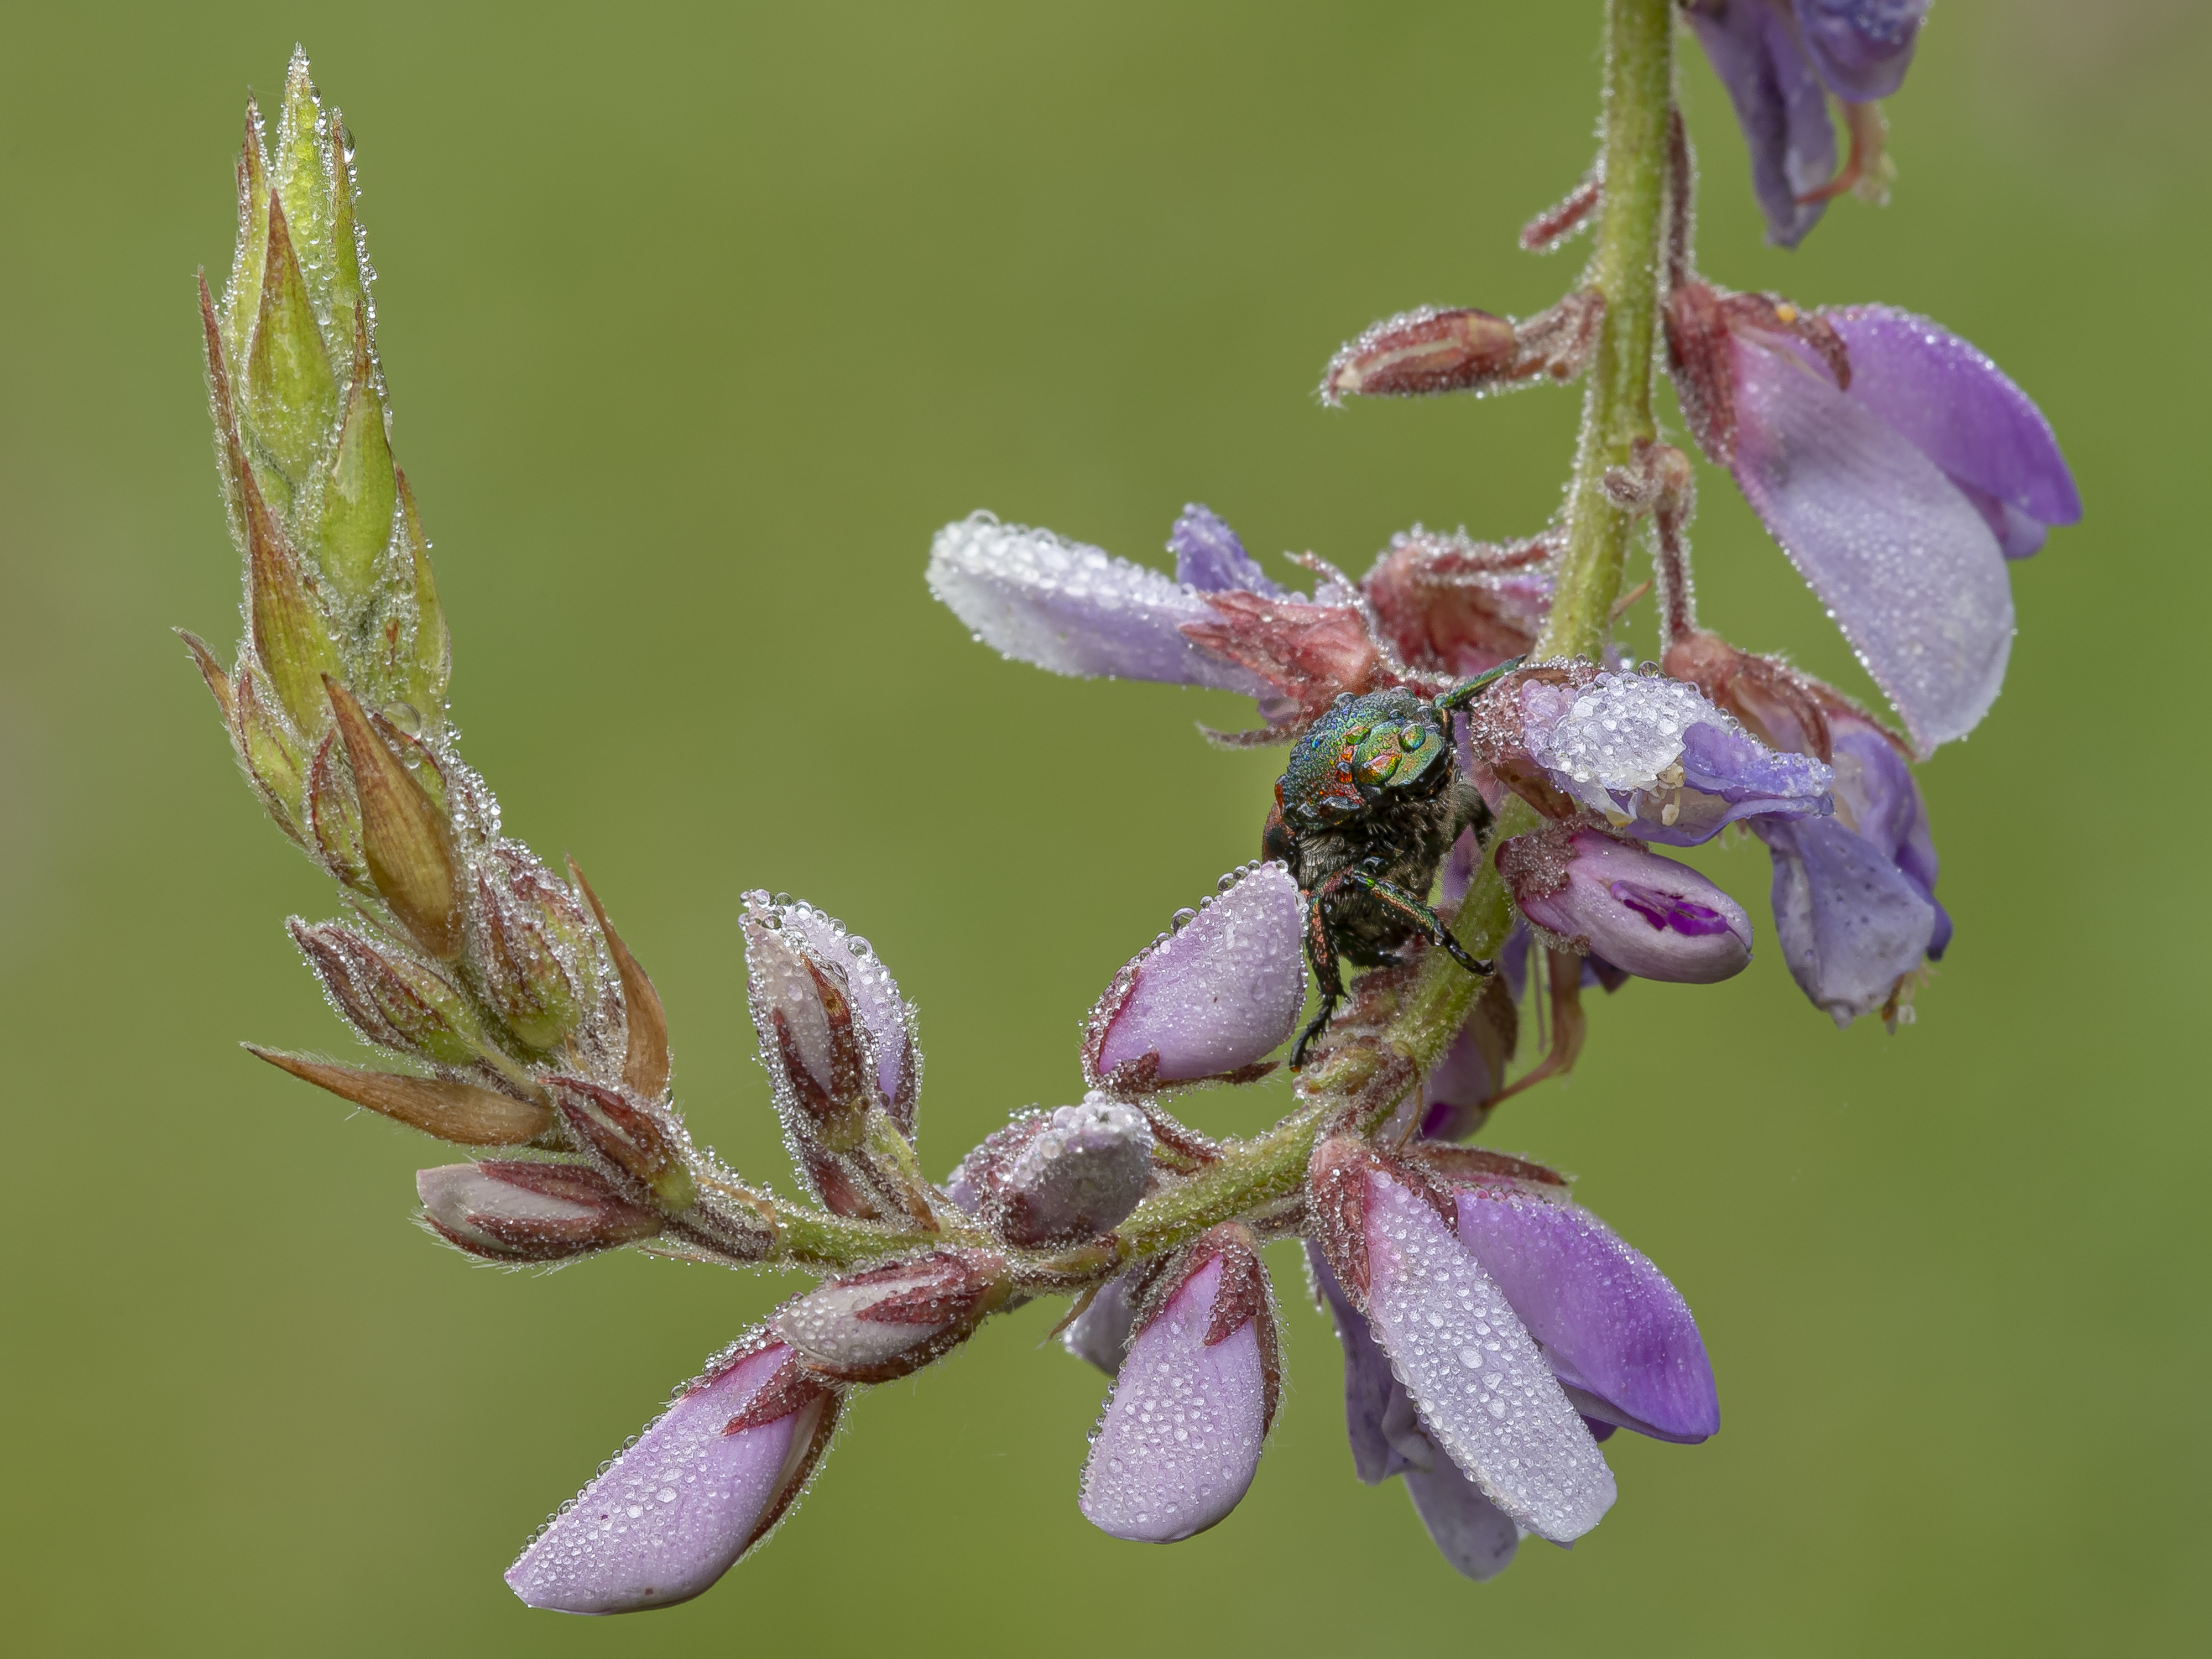 Close up of a Japanese beetle on purple flowers in the dew